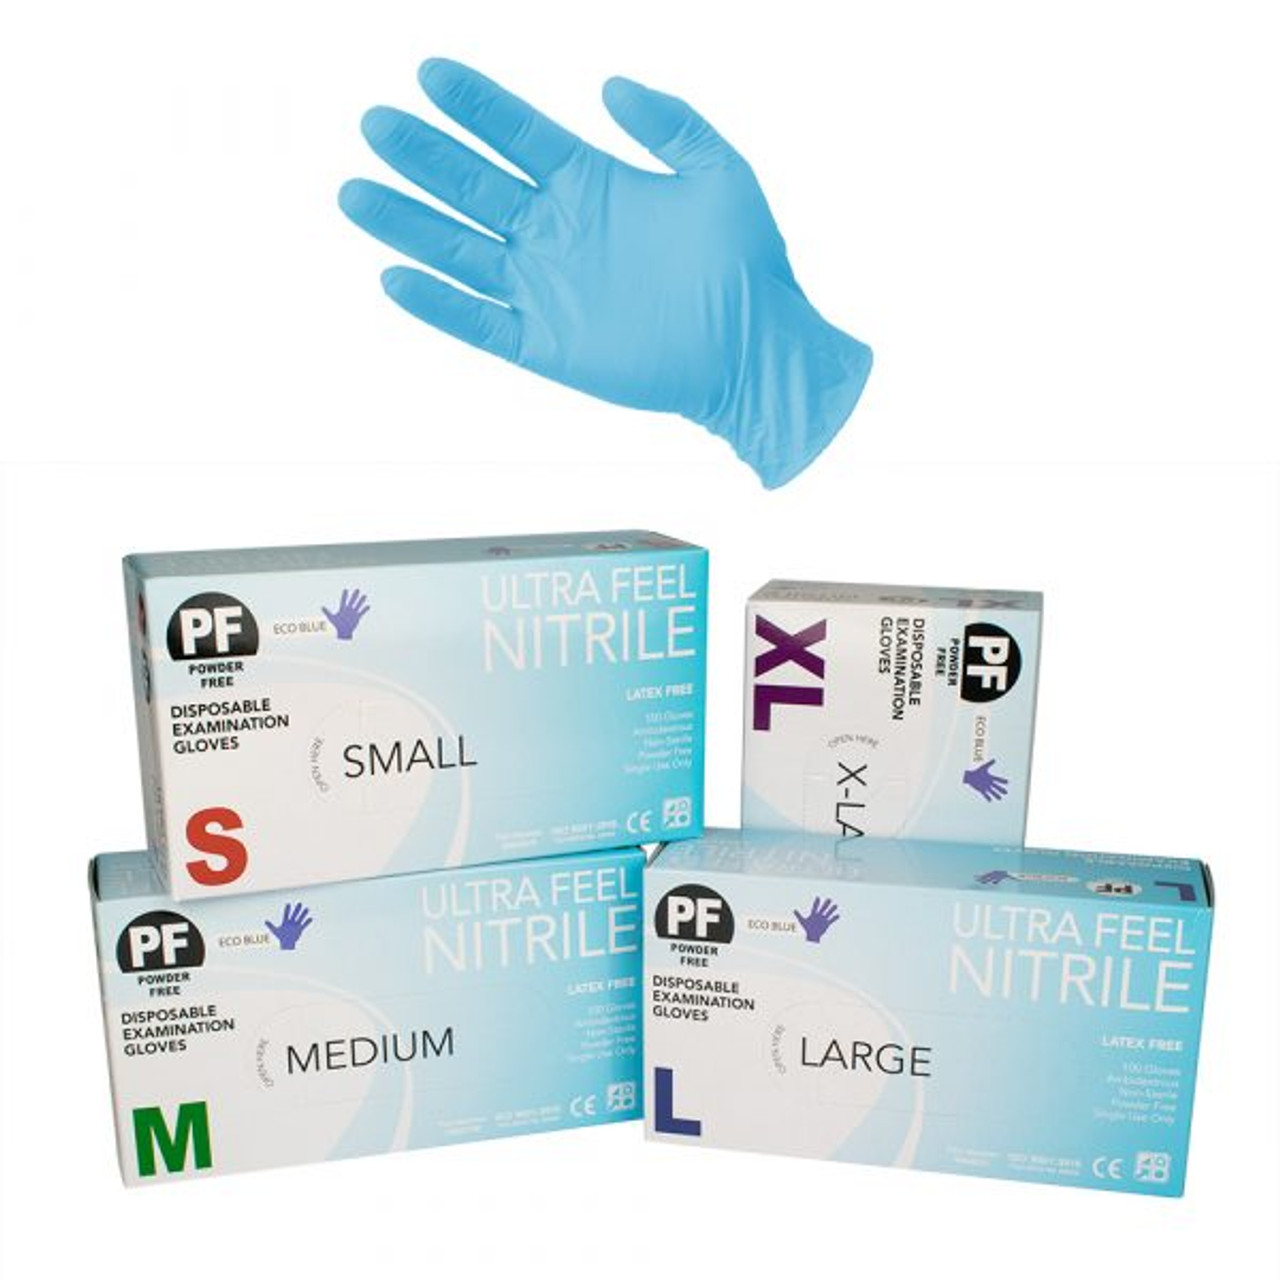 Antibacterial Gloves Lab Gloves Latex Free Disposable Powder Free S 100Pcs Medical Gloves Nitrile Exam Gloves Disposable Gloves Safety & Security originsofwhiskey.com